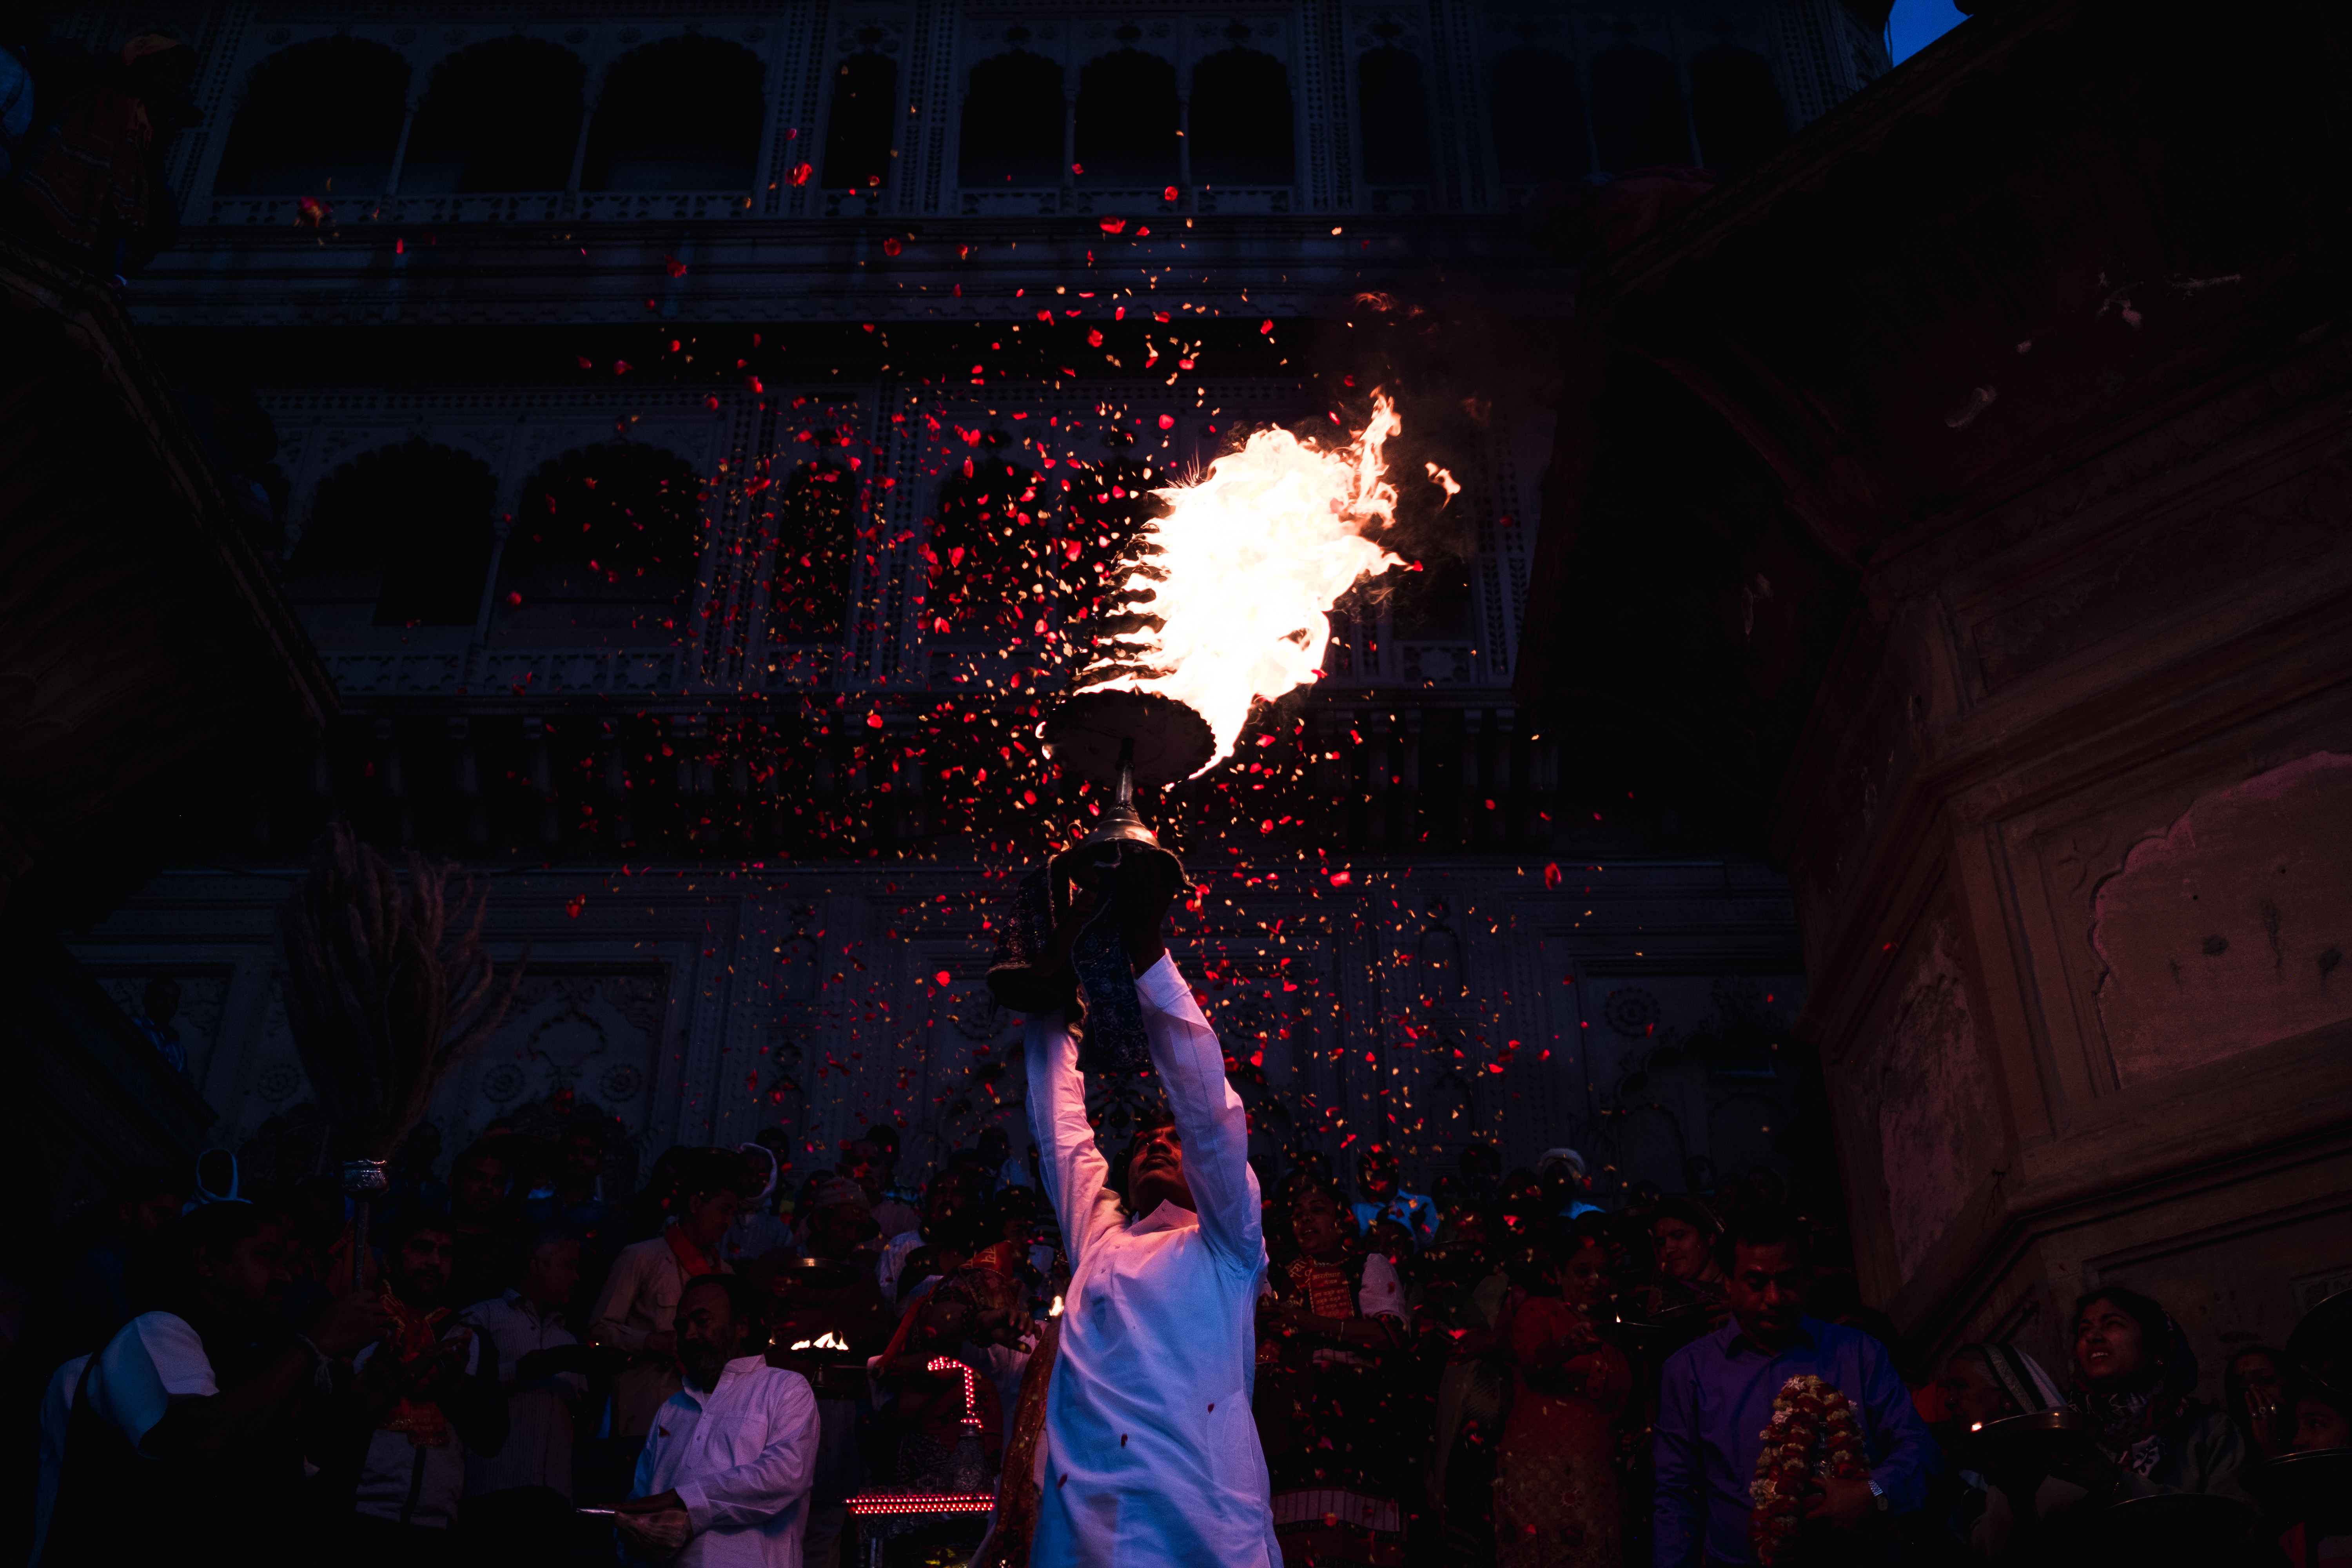 India Street Photography During Holi Festival. rose pedals thrown over fire. Images by Jason Vinson